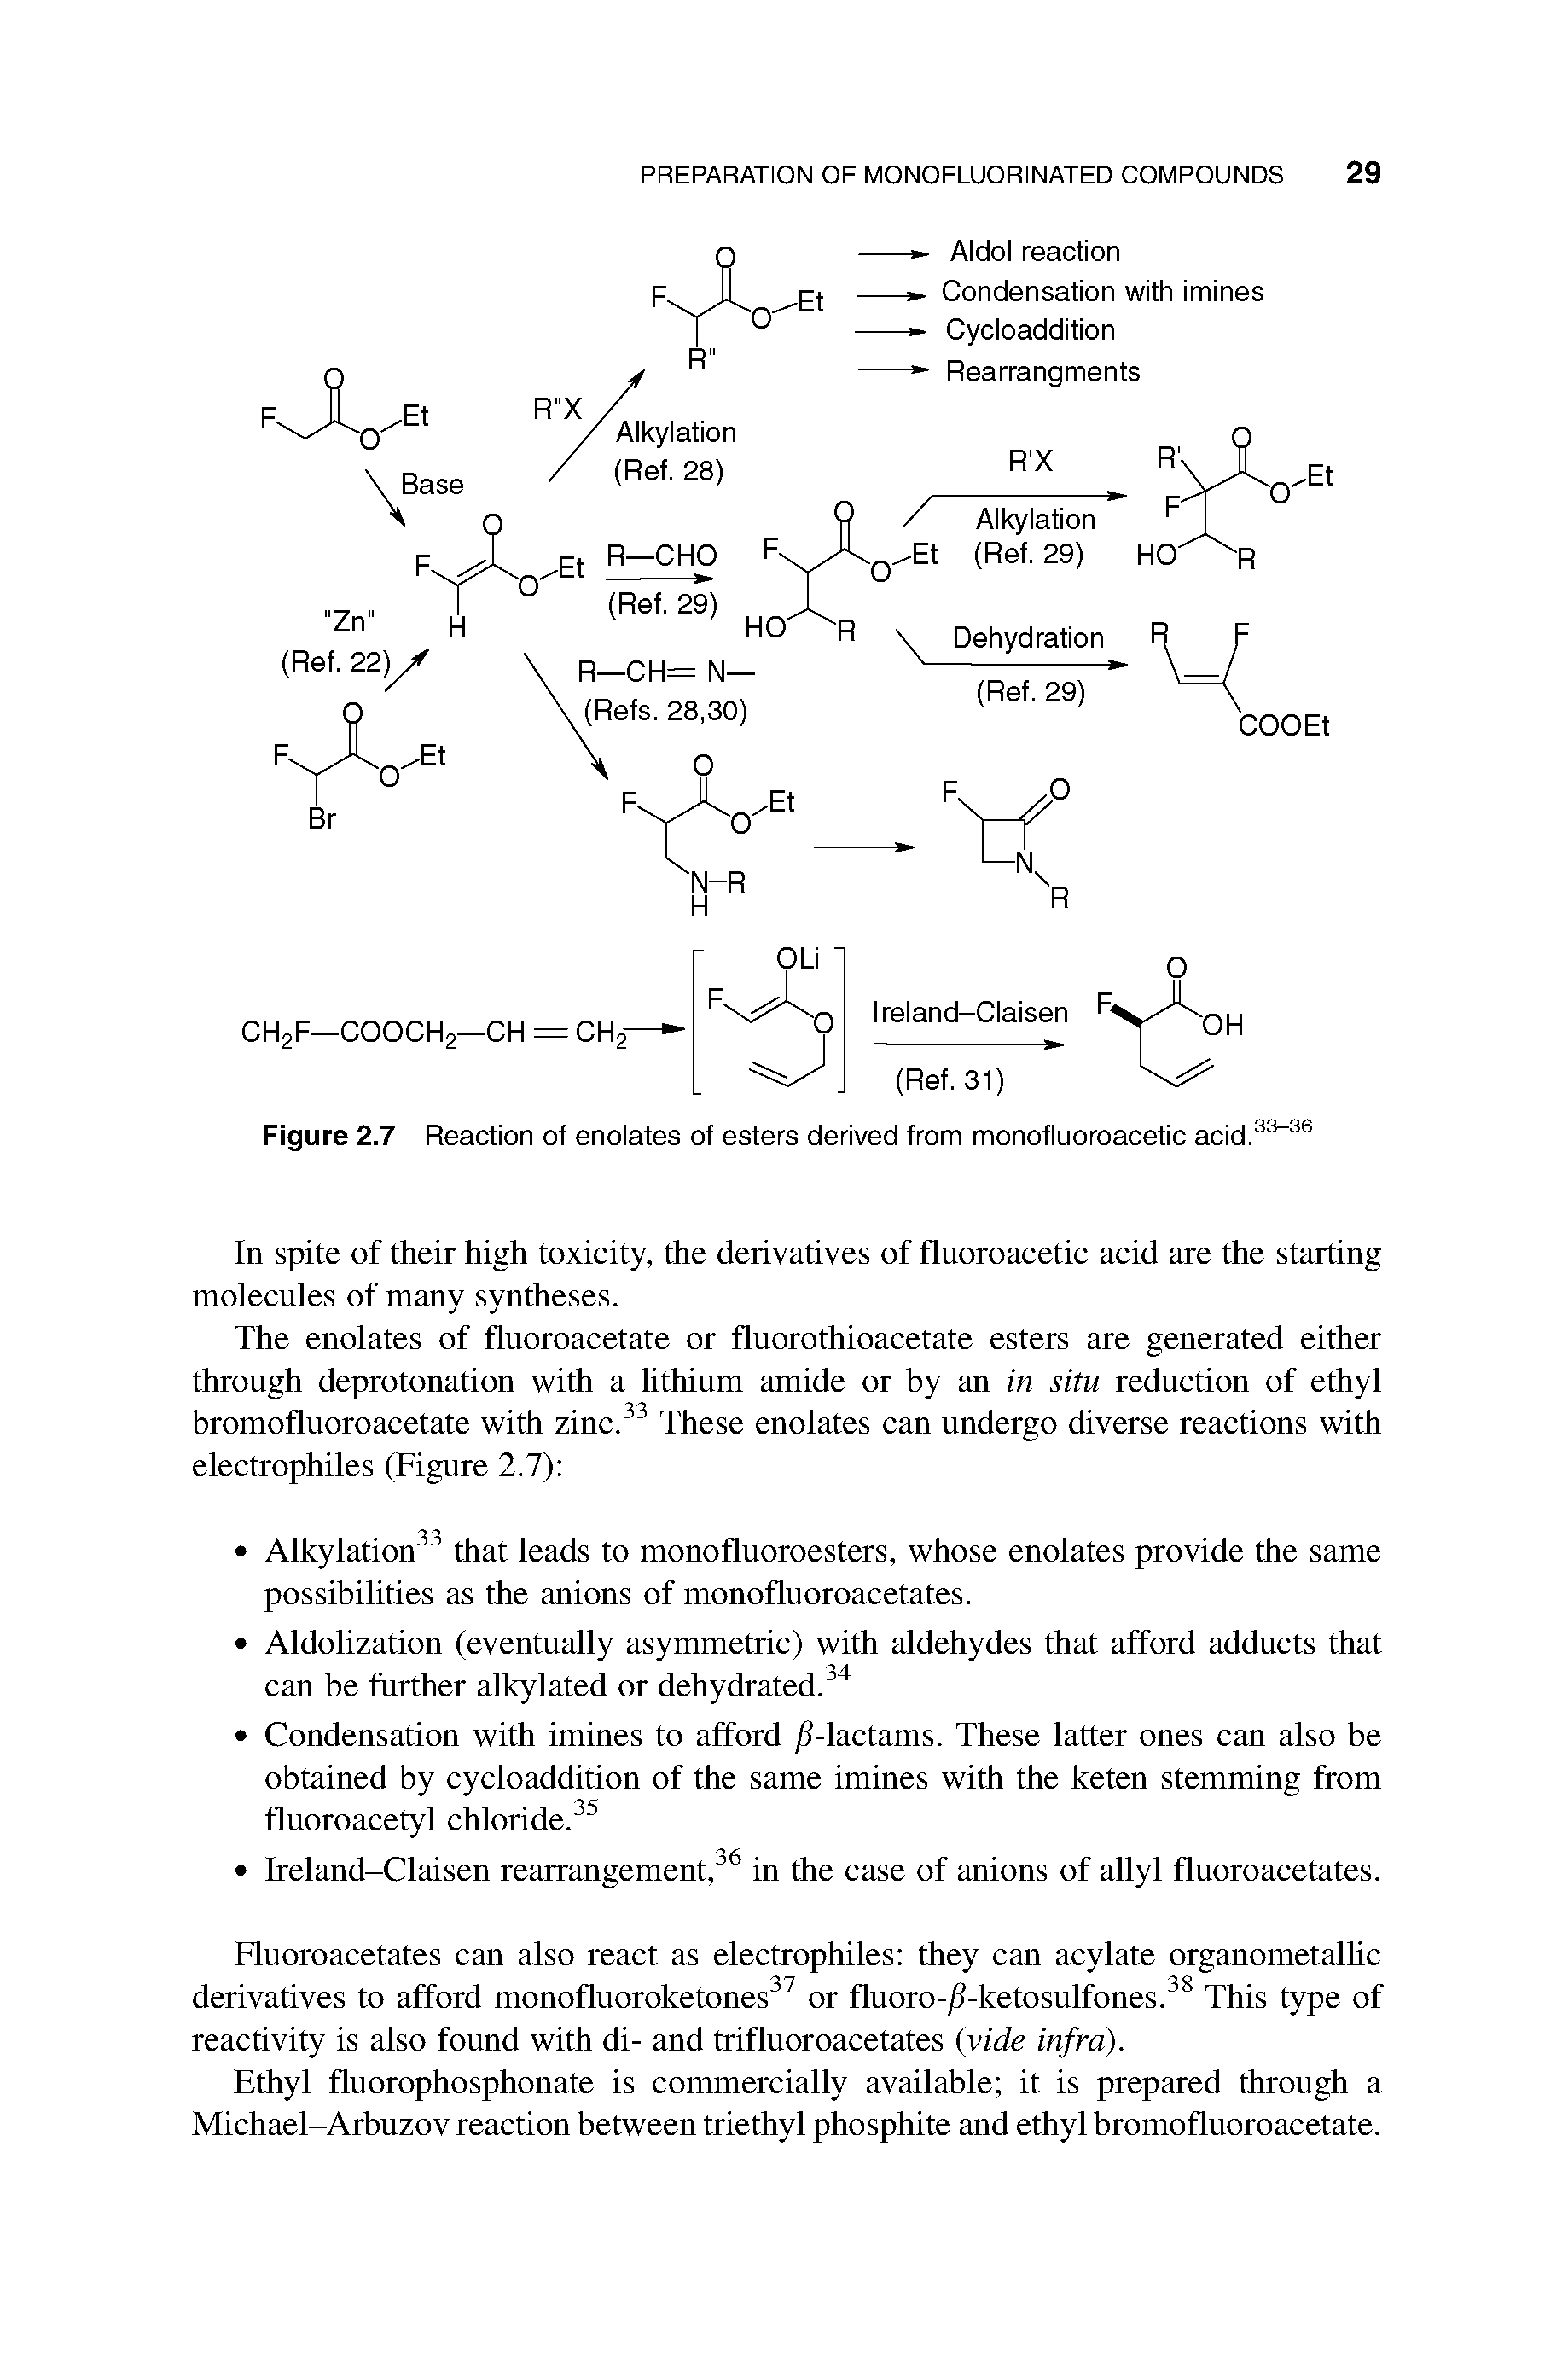 Figure 2.7 Reaction of enolates of esters derived from monofluoroacetic acid. ...